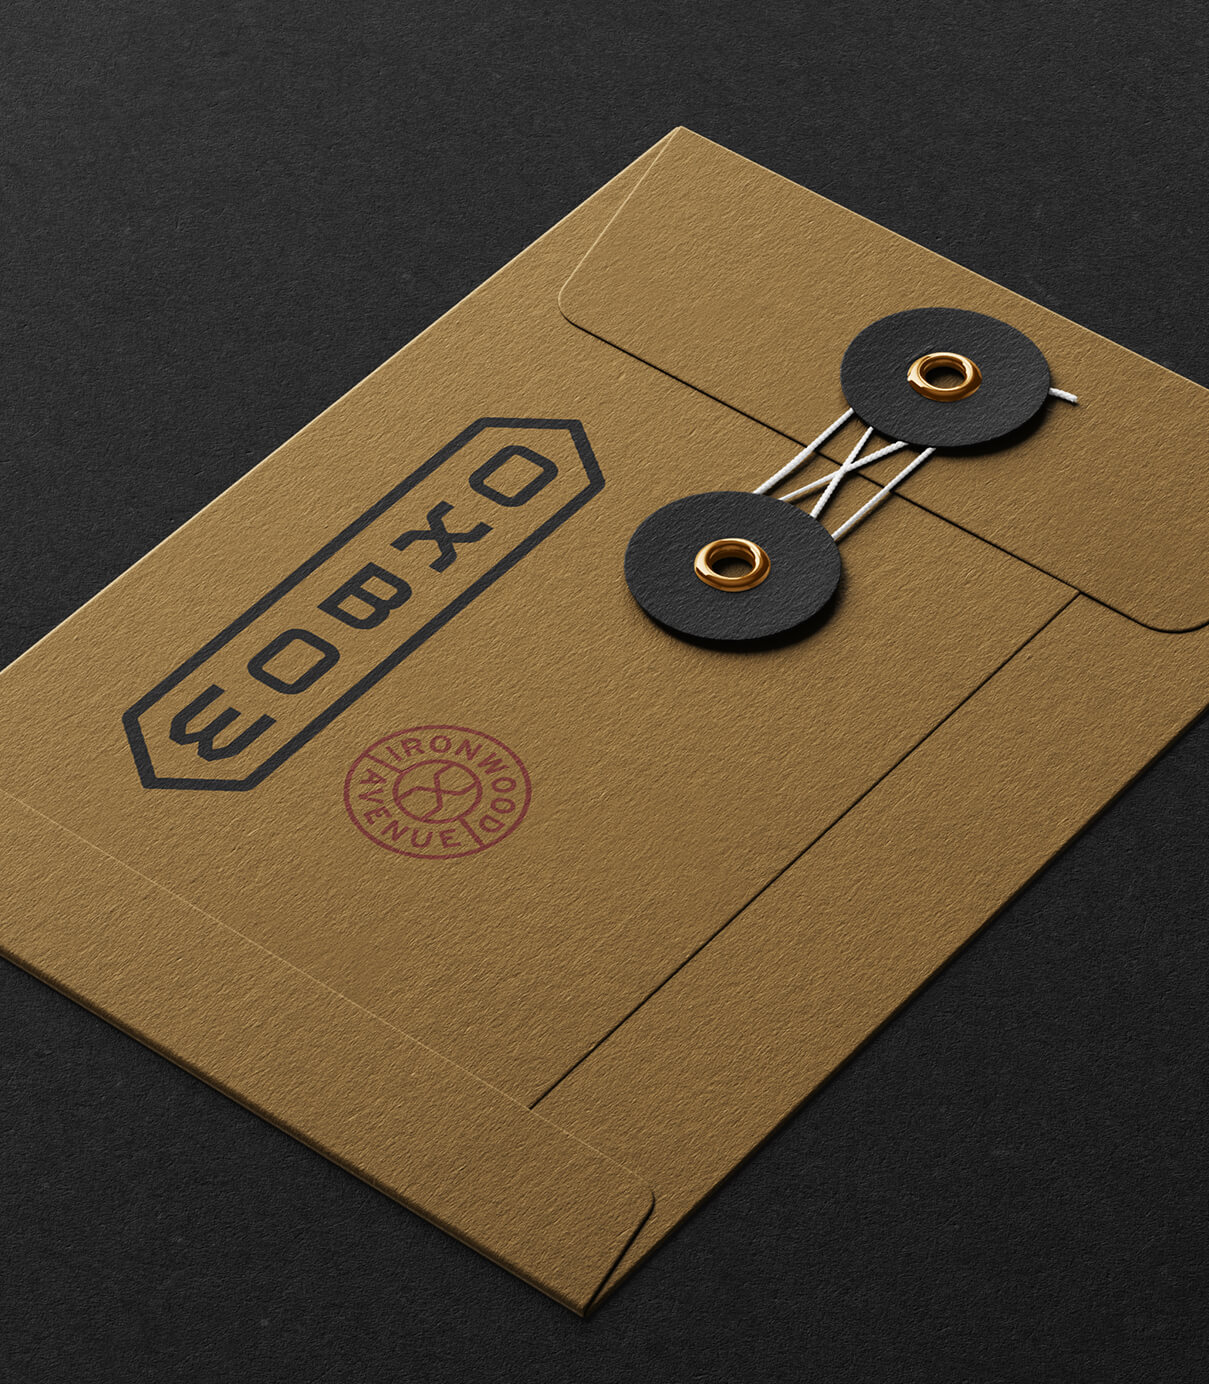 Oxbow branded gold envelope with logo stamps